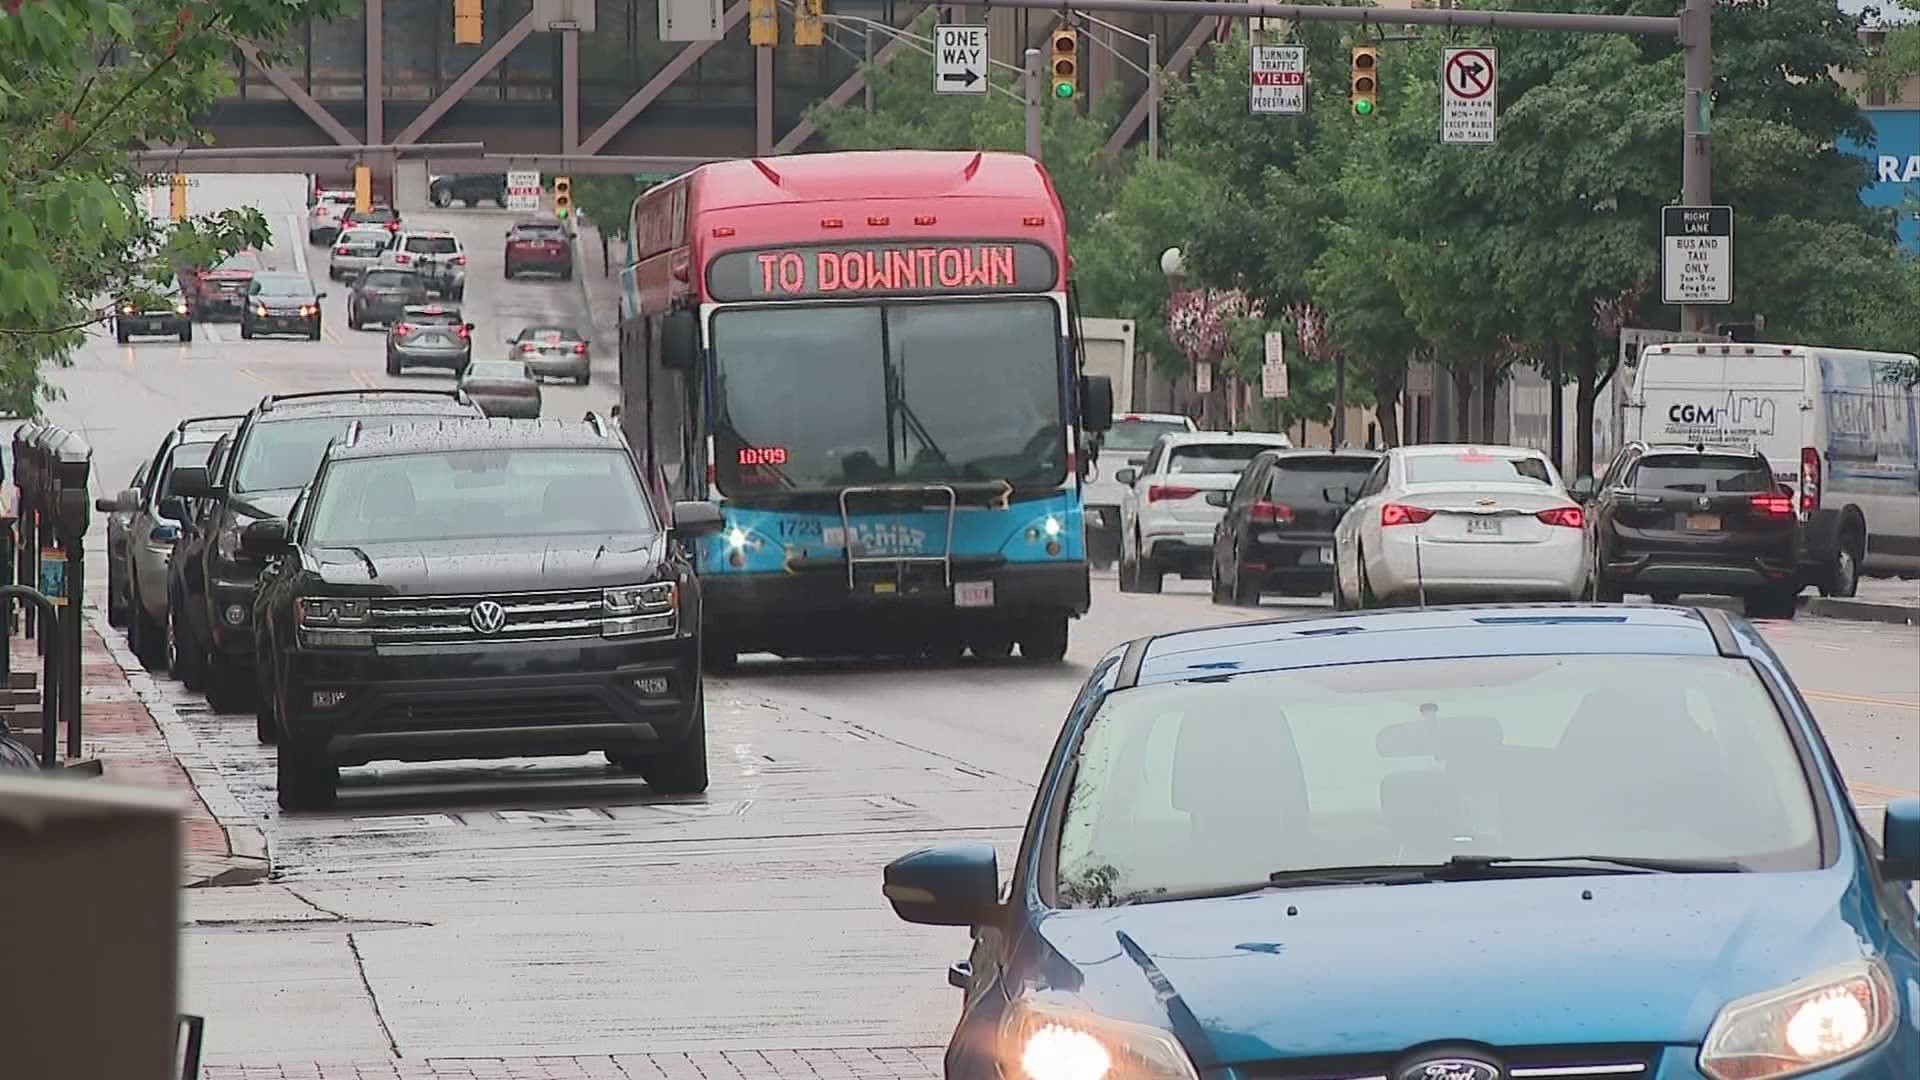 While the downtown no-fare service will not come back after being suspended, COTA’s C-pass program is available to more than 13,000 riders.